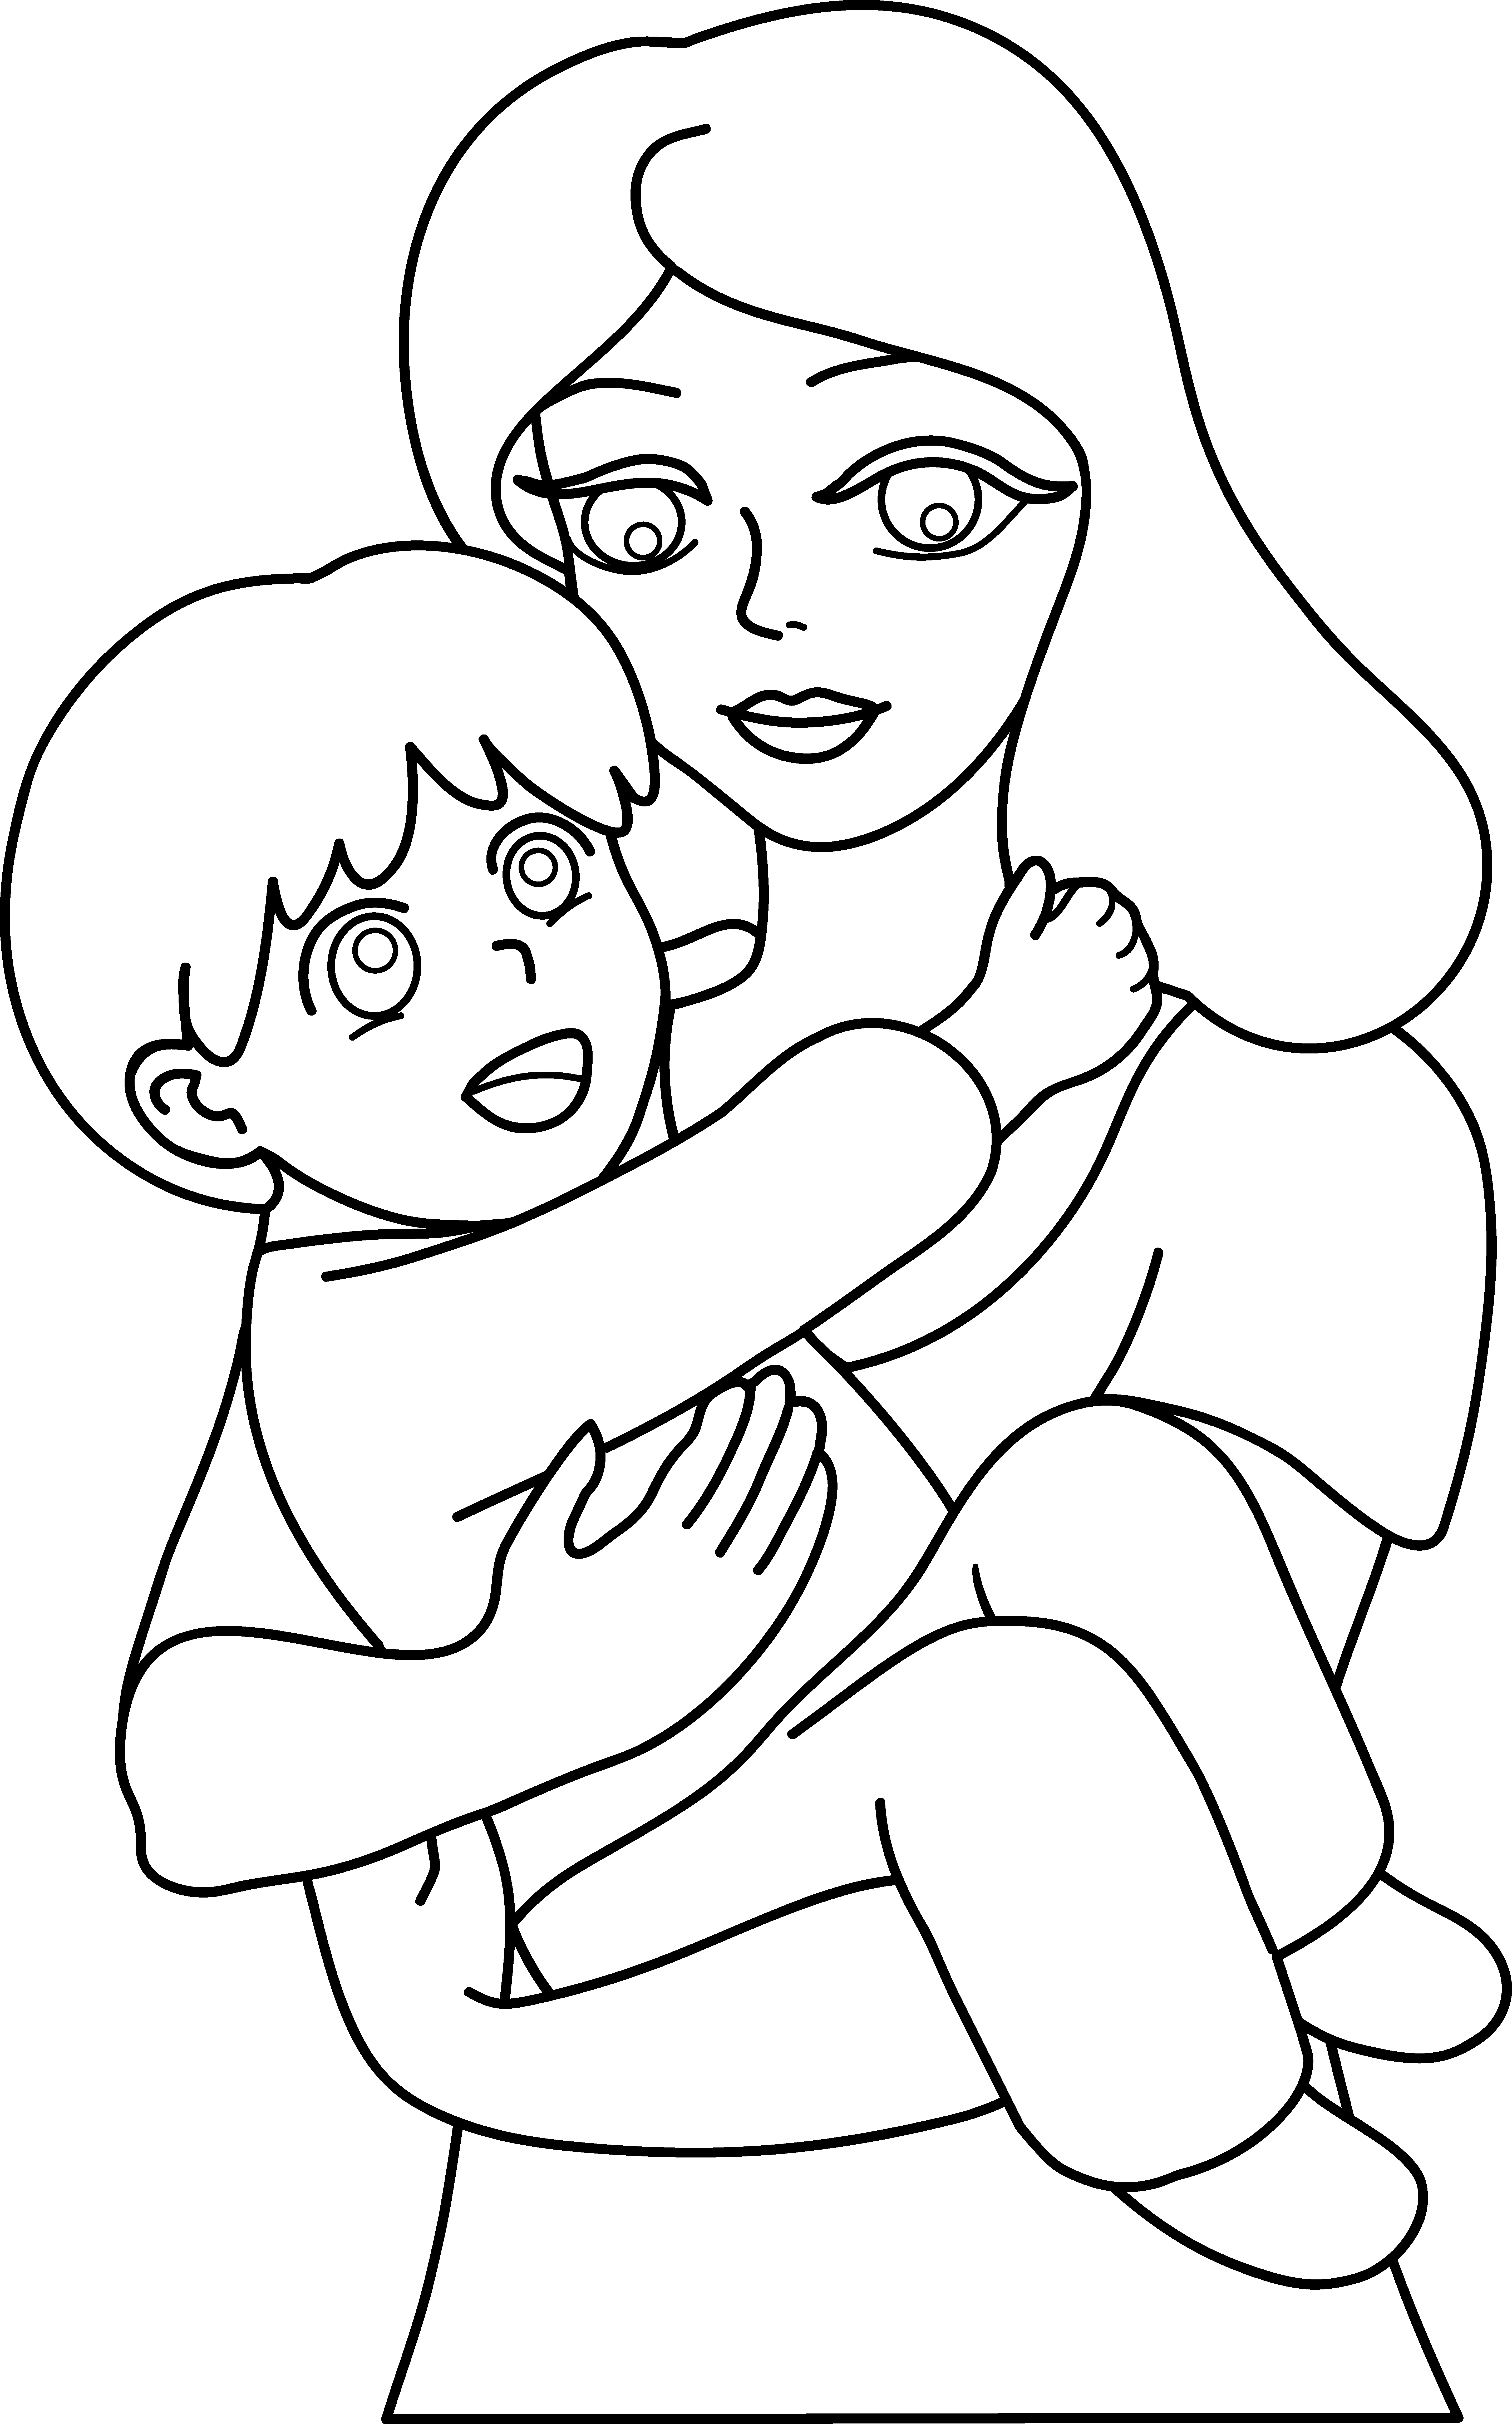 free printable mothers day coloring pages paper trail design - mom is breastfeeding coloring page free printable coloring pages | coloring pages printable of mom